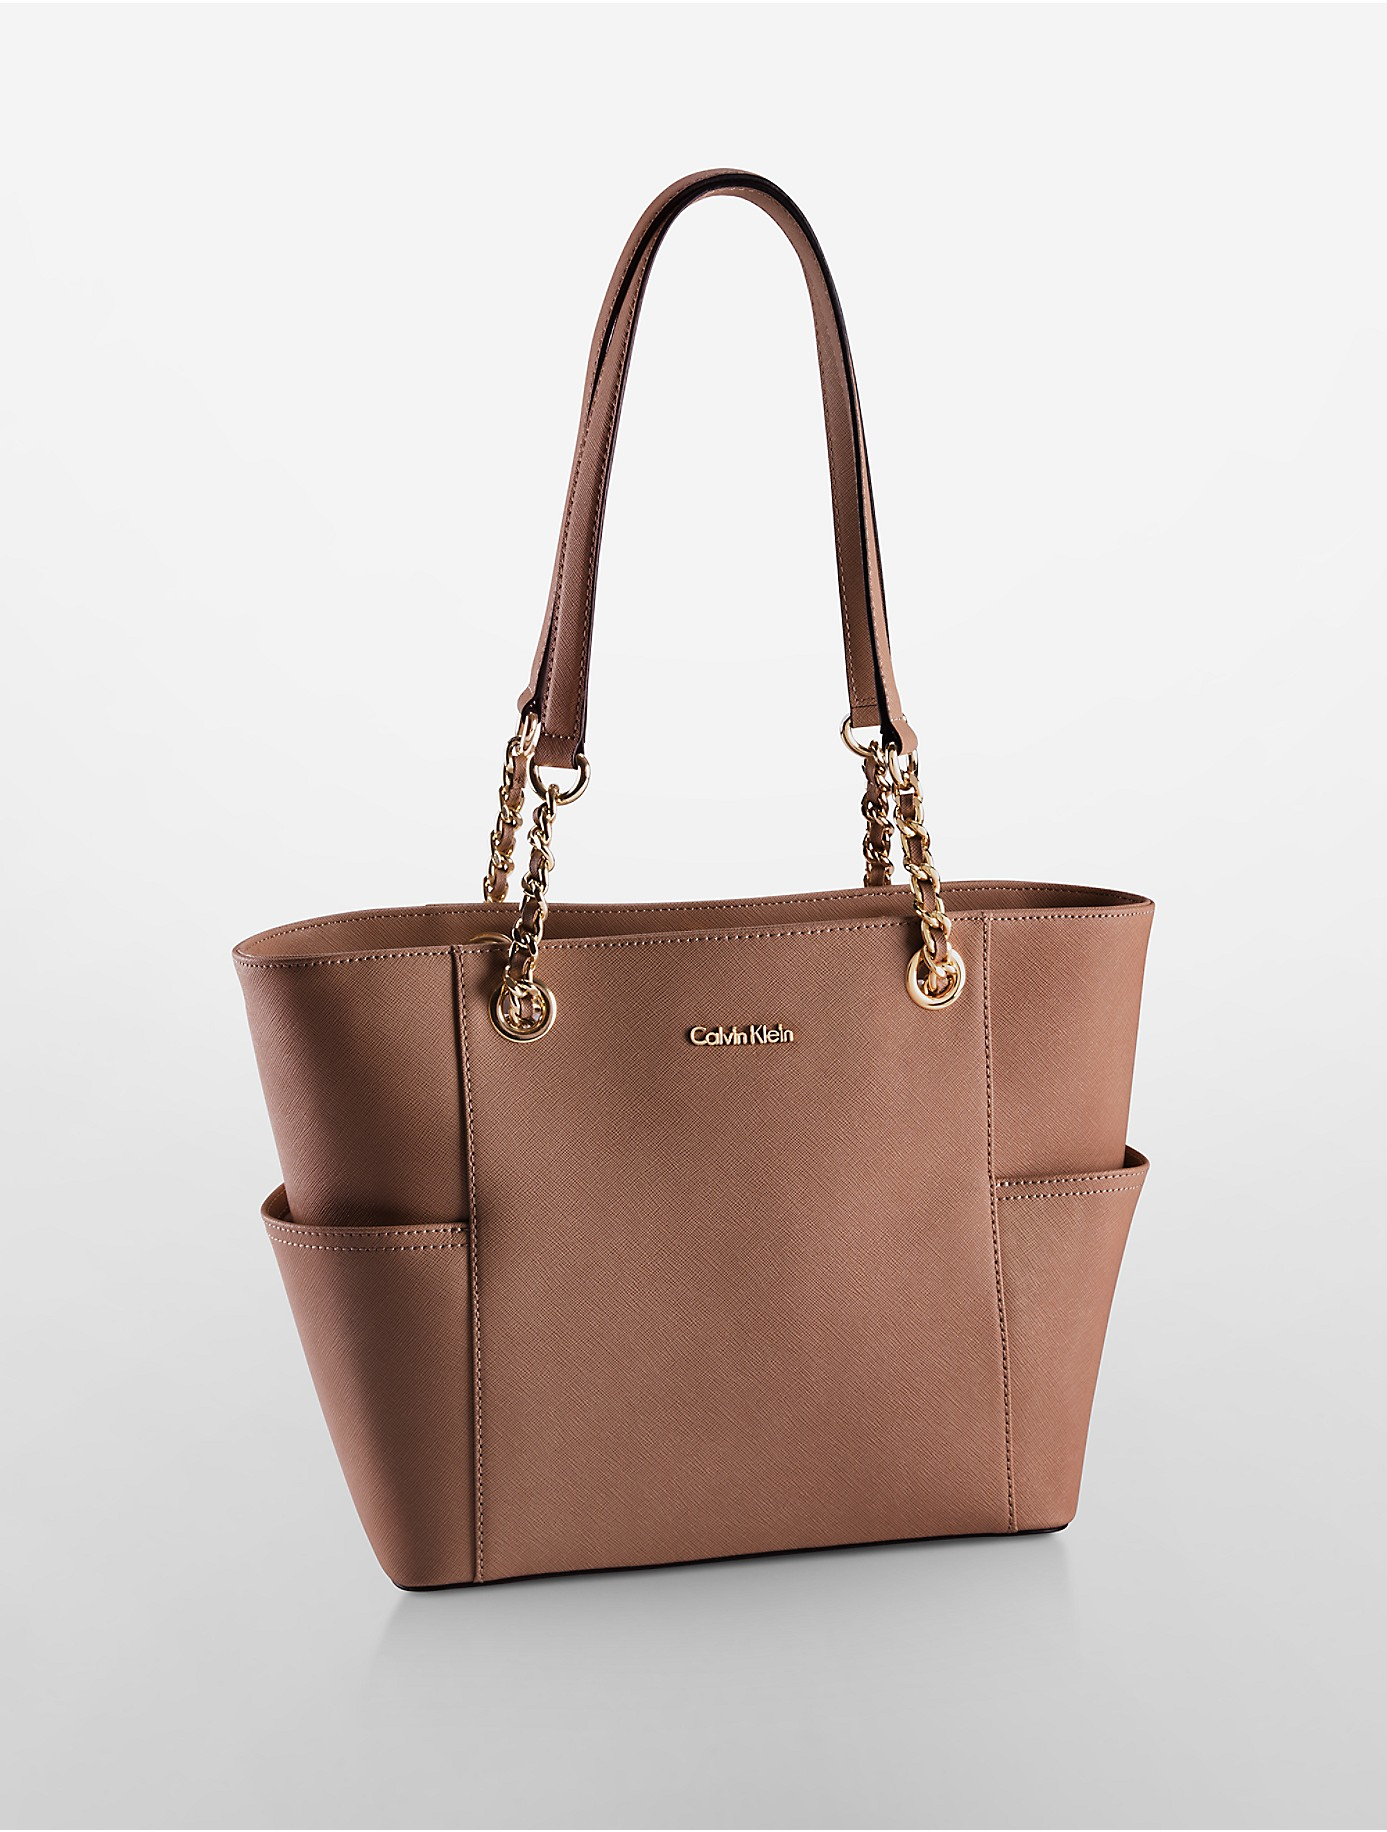 Calvin klein Saffiano Leather Chain-trimmed Tote Bag in Brown | Lyst